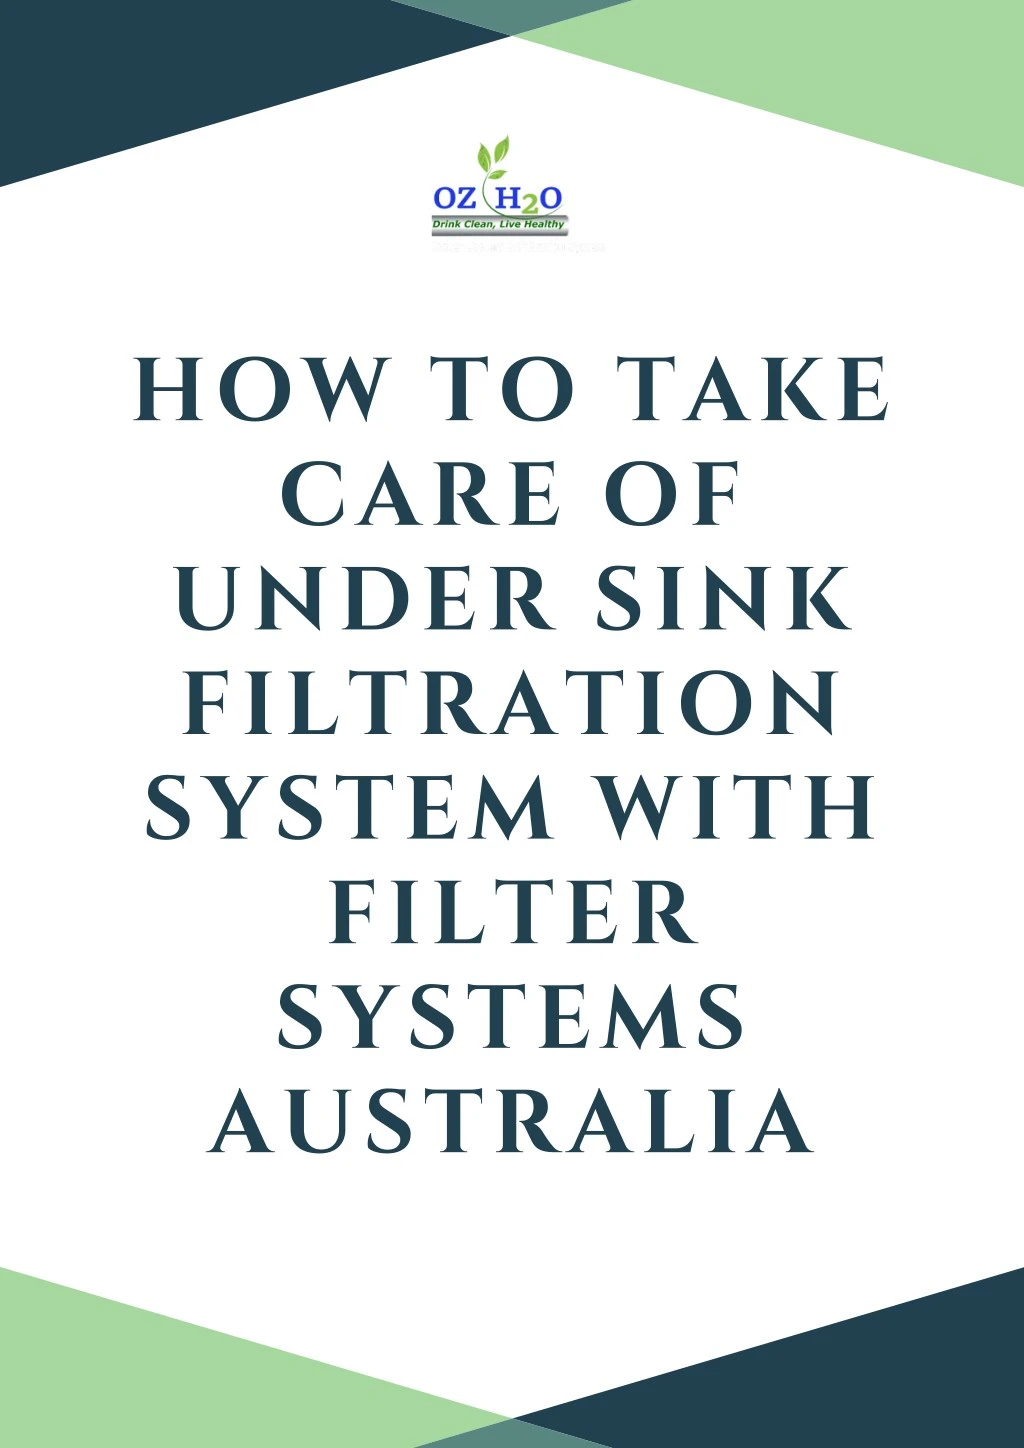 how to take care of under sink filtration system